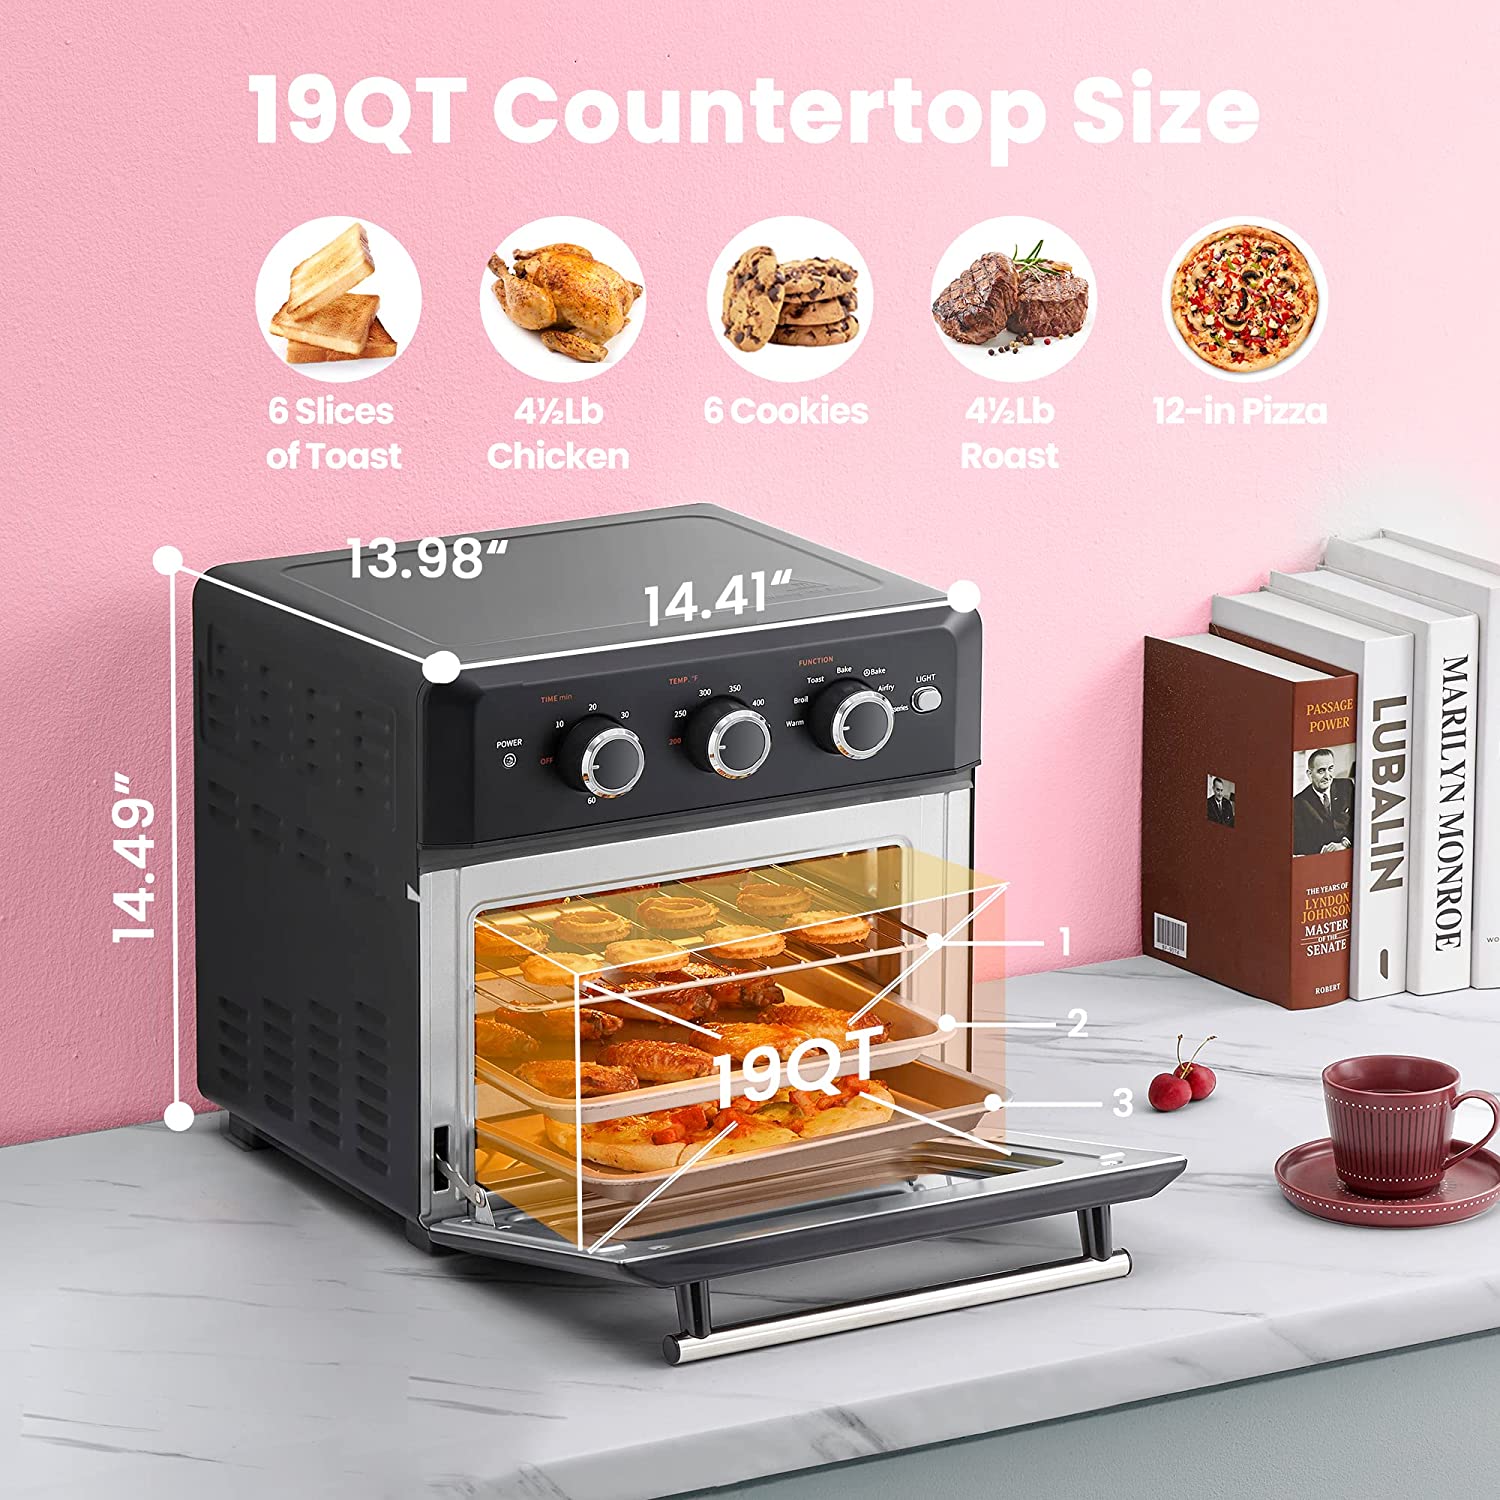 https://bigbigmart.com/wp-content/uploads/2023/06/COMFEE-Retro-Air-Fry-Toaster-Oven-7-in-1-1500W-19QT-Capacity-6-Slice-Air-Fry-Rotisseries-Warm-Broil-Toast-Bake-Convection-Bake-Black-Perfect-for-Countertop9.jpg